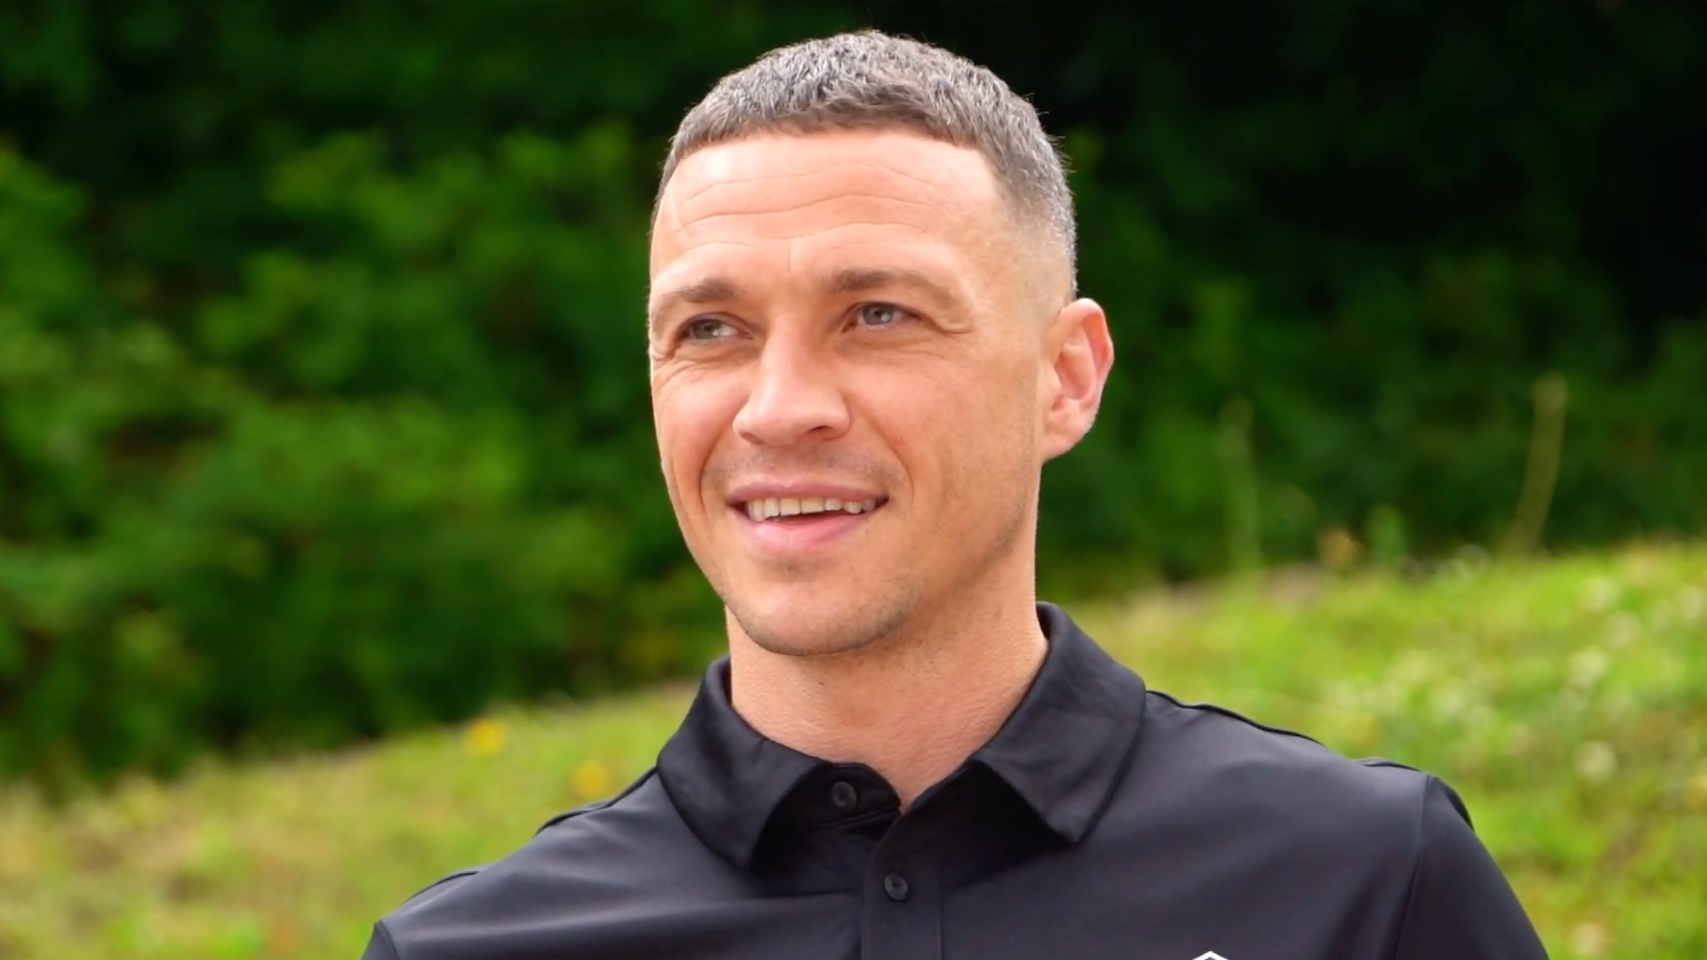 Salford City sign James Chester on a free transfer from Barrow